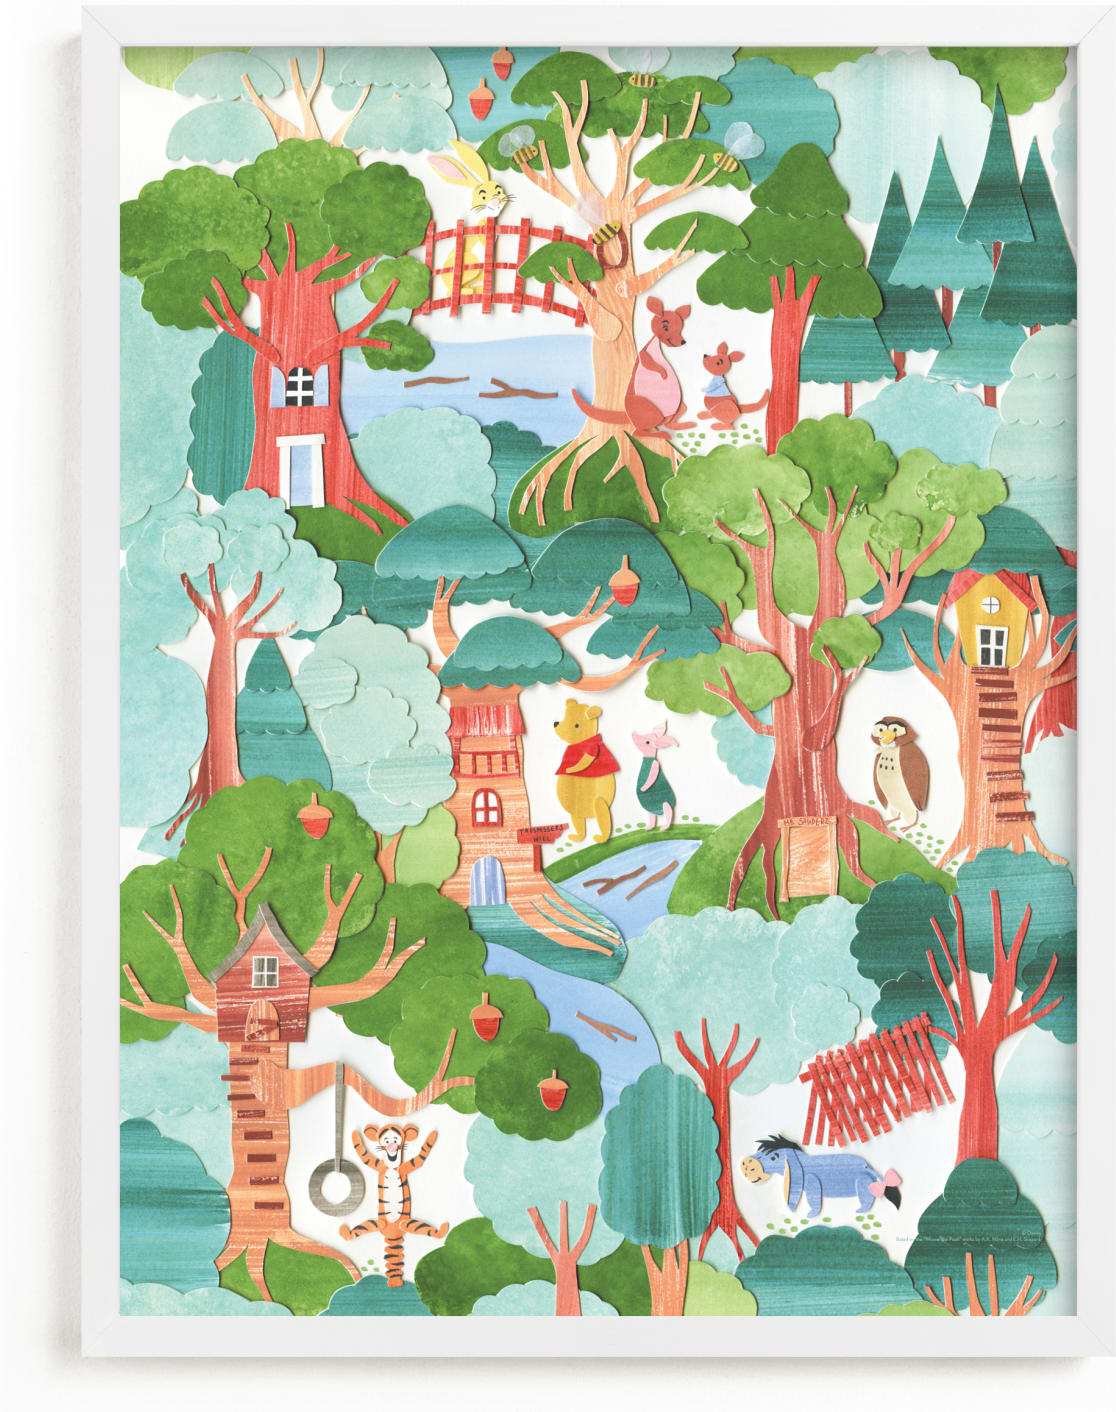 This is a green disney art by Sarah Knight called Disney Hundred Paper Woods.